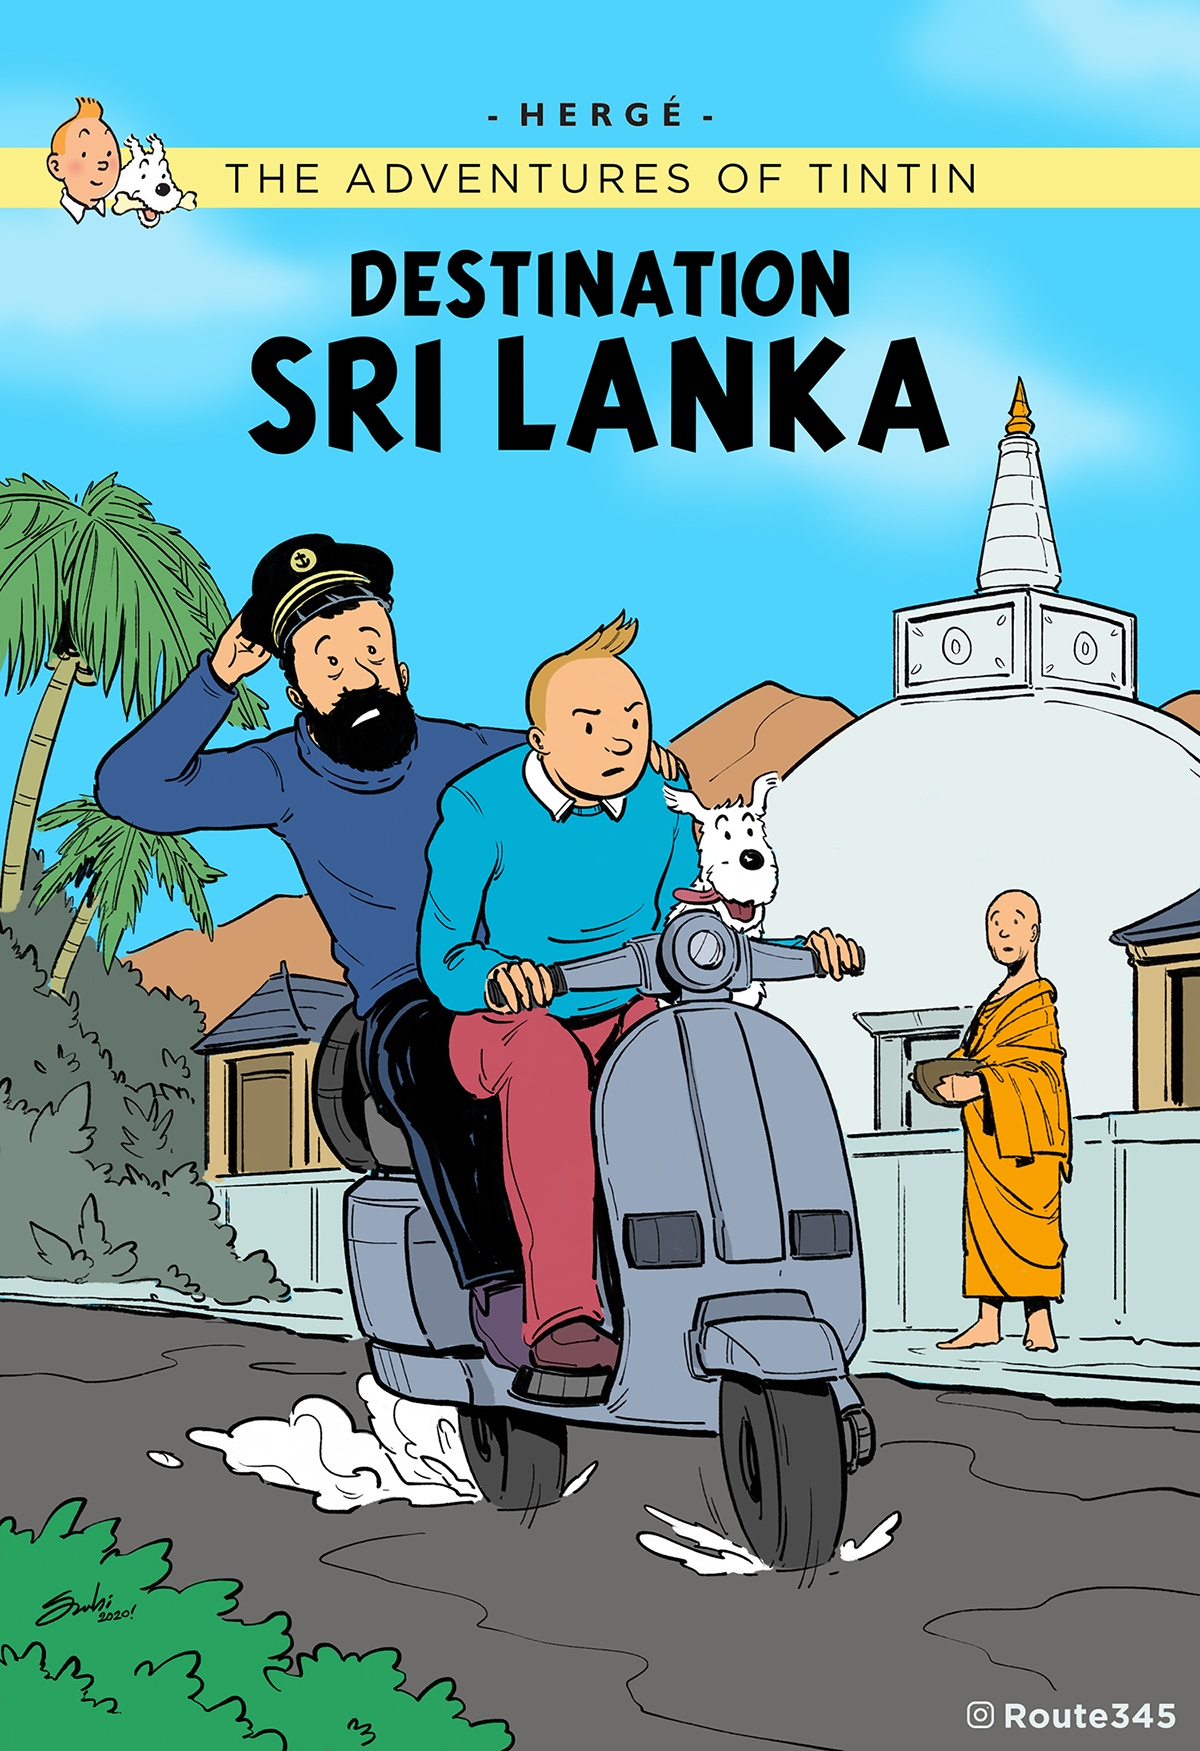 Sachi | Pre-order ENLIGHTENED "Hey #lka Twitter. Any Tintin fans out here? Fan art by yours truly. https://t.co/PA2lf0wRmd" / X